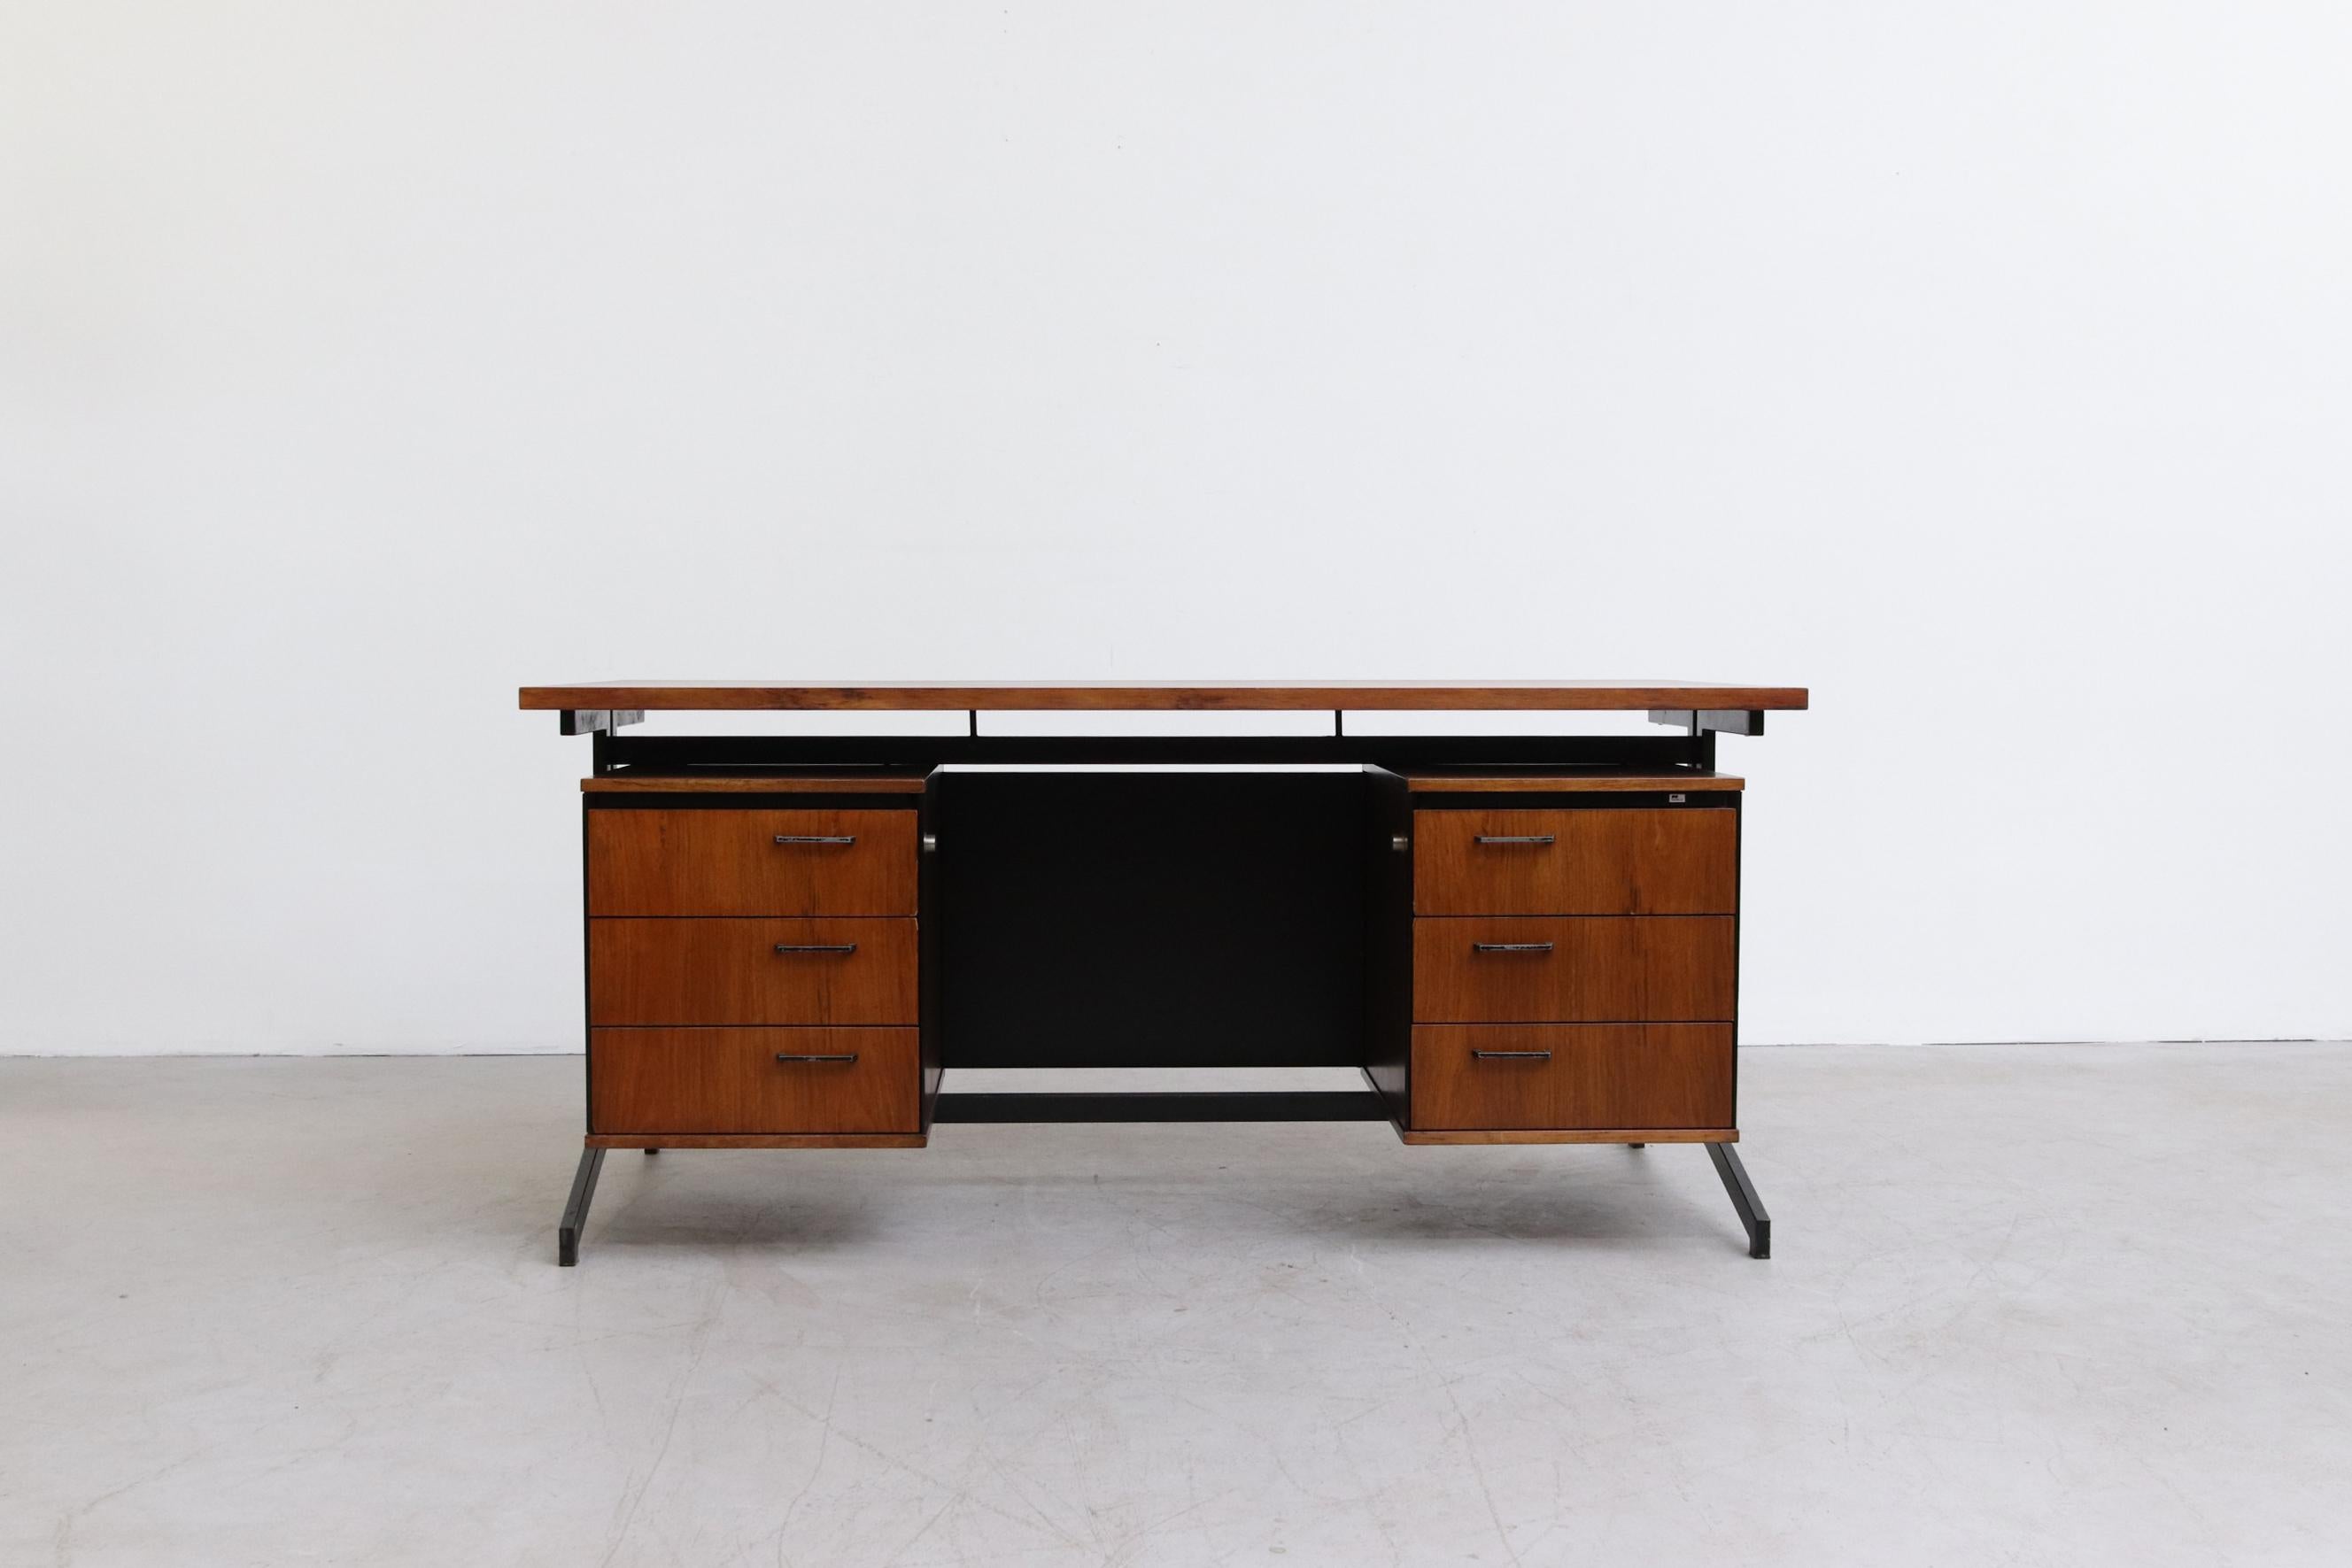 Rosewood executive desk with two sets of stacked drawers, a skai wrapped privacy screen and a floating rosewood top on a black enameled metal frame with prouve style legs. In original condition with visible wear and scratching. Leg opening is 24.5'.